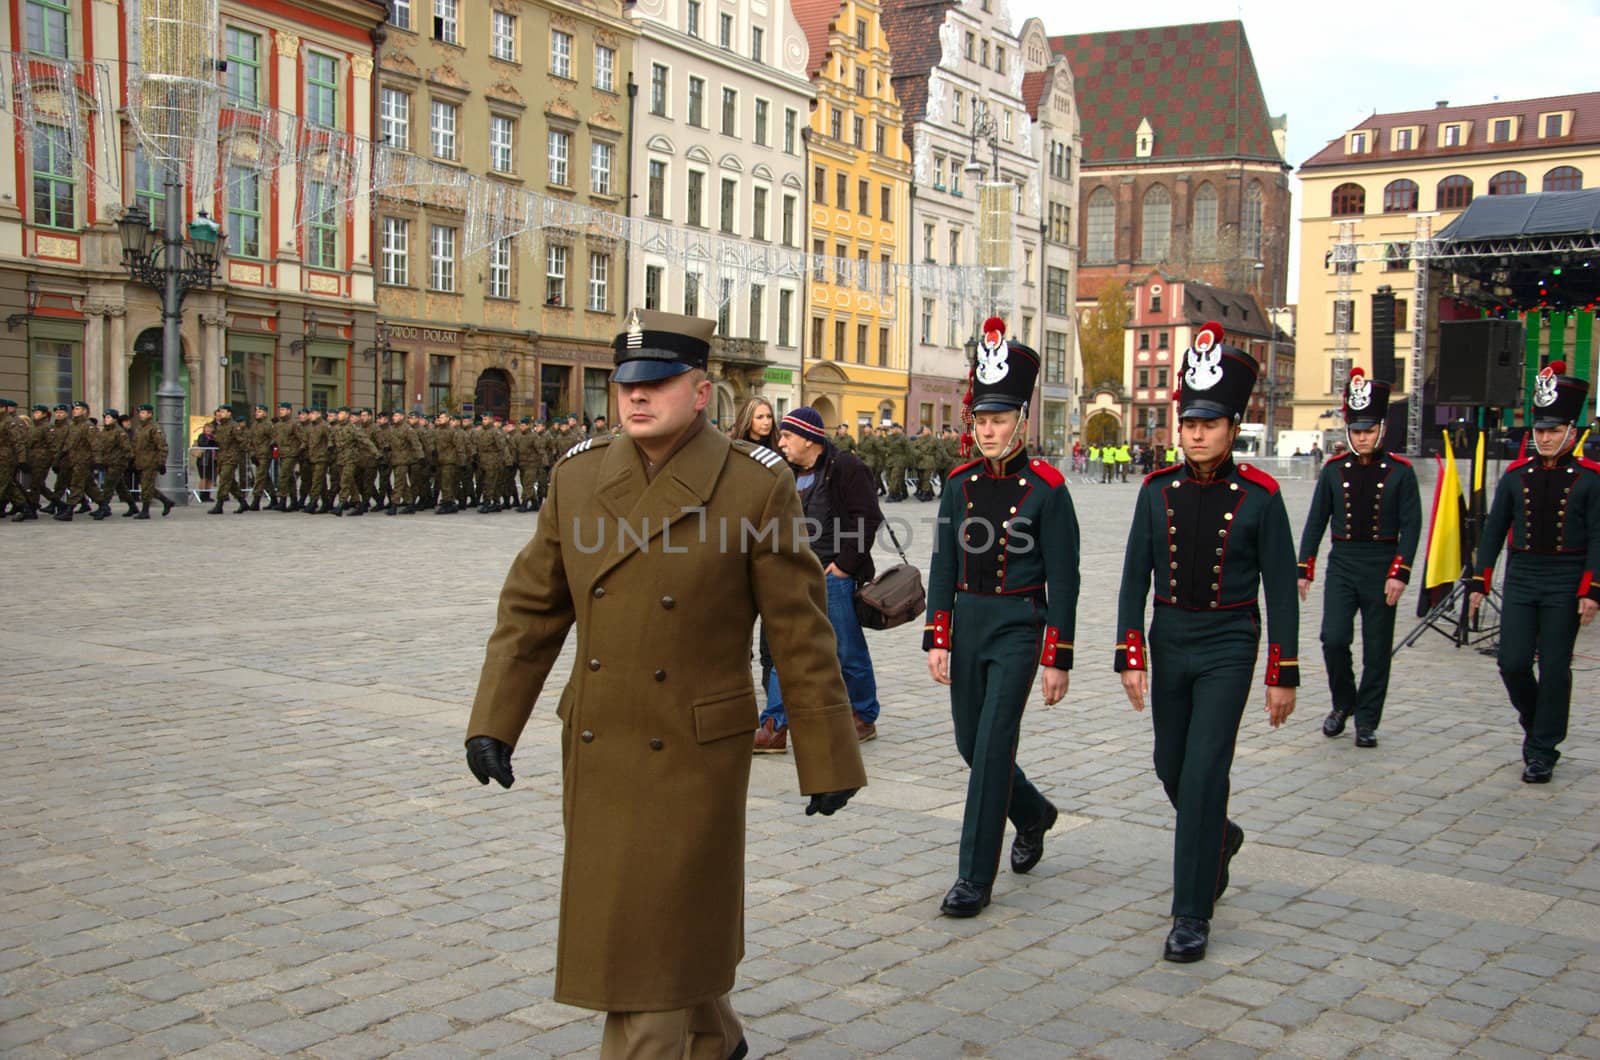 WROCLAW, POLAND - DECEMBER 2: Polish army, engineering training center for troops receives new army banner. Soldiers in historical uniforms on December 2, 2011.